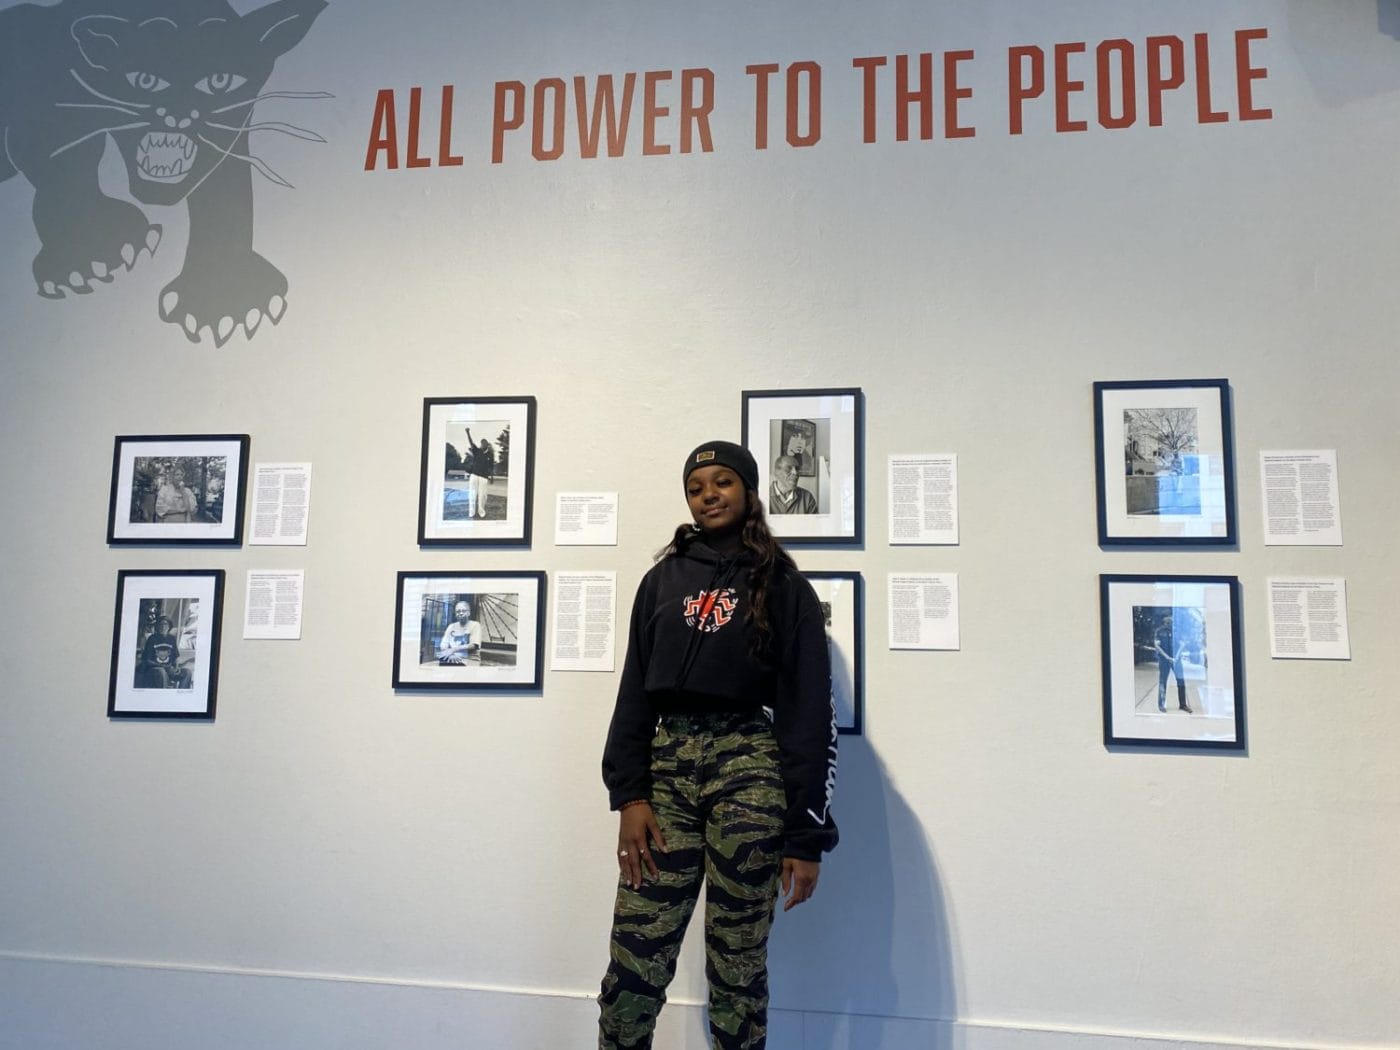 Black-Panther-Party-Museum-Bree-B.-Ali-‘All-Power-to-the-People-portraits-by-Tiffany-Caesar-1400x1050, The People’s Narrative: The Black Panther Party Museum in Oakland, Culture Currents Featured Local News & Views 